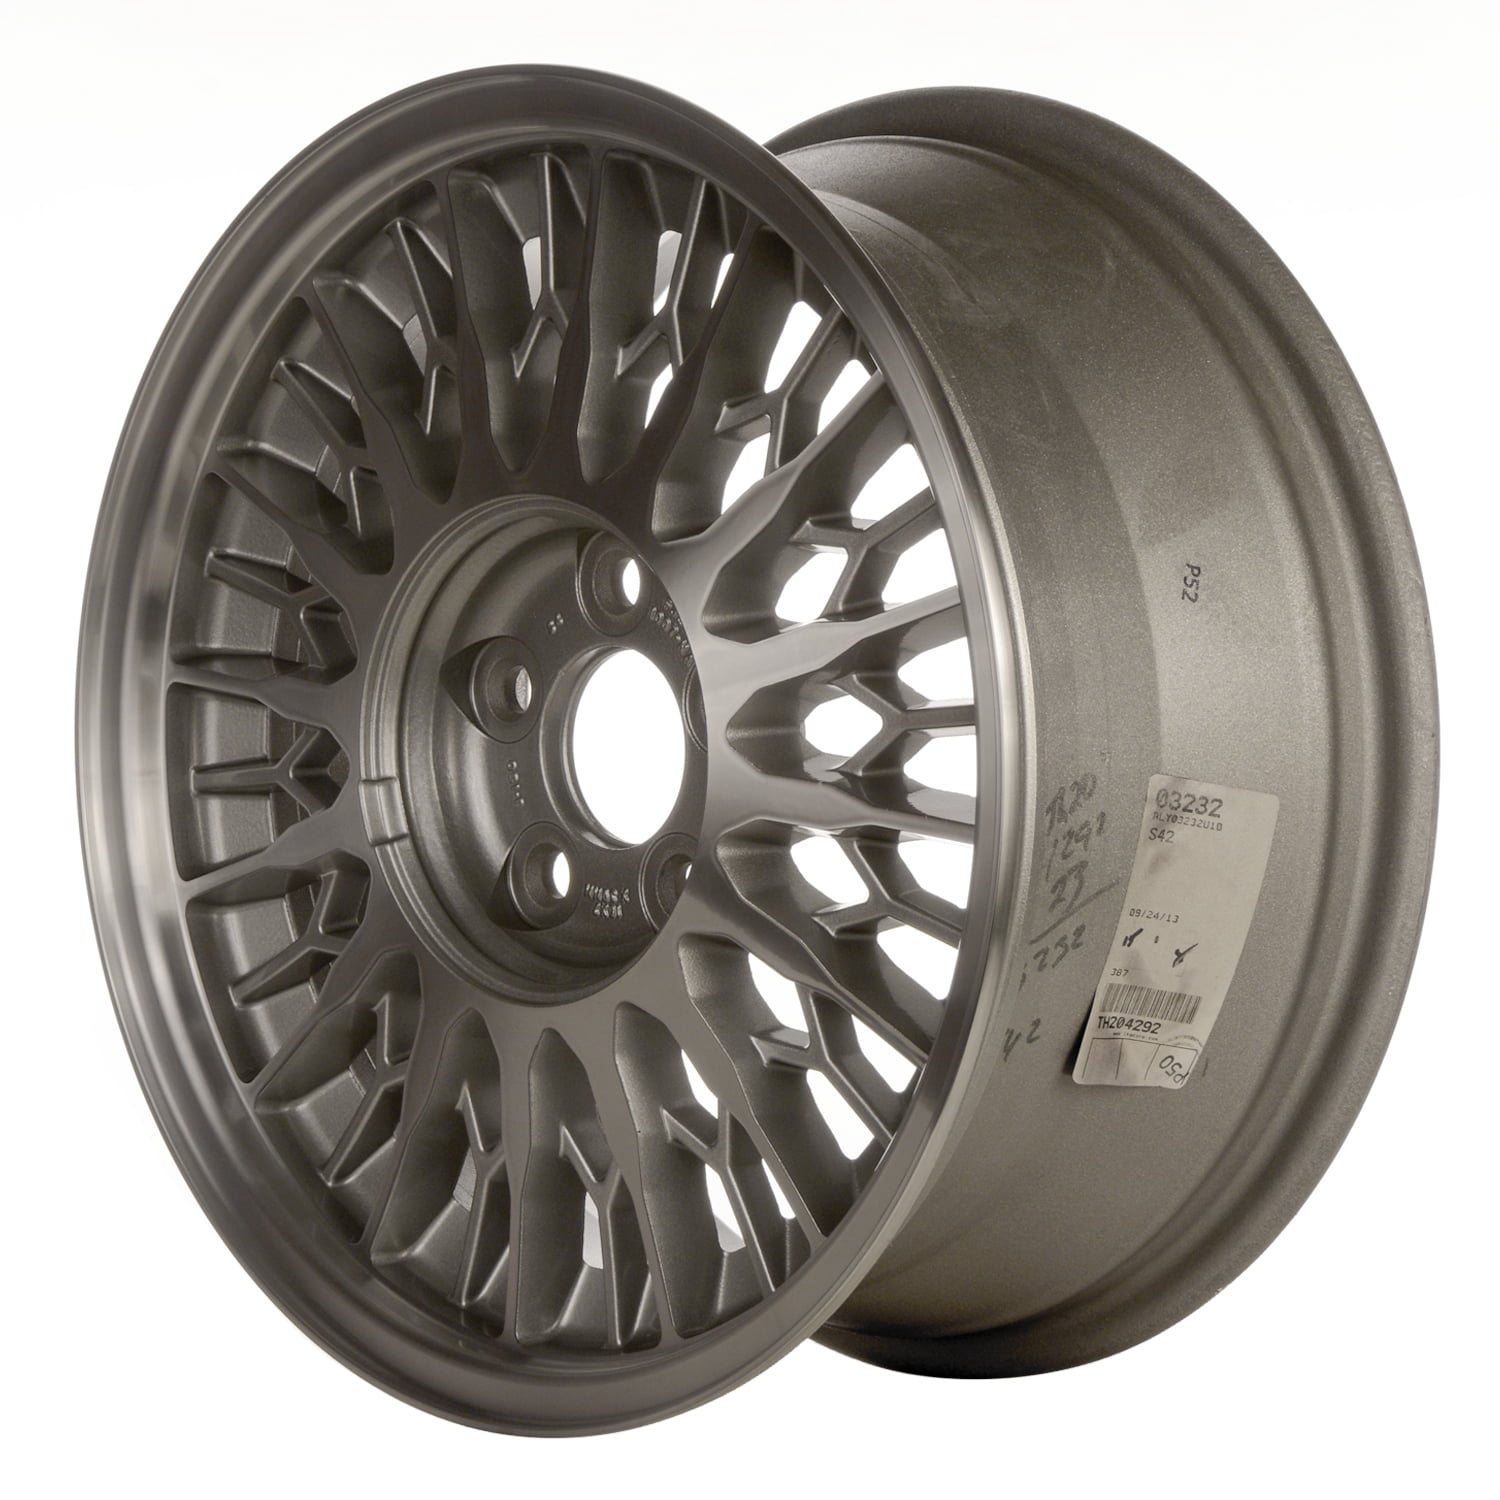 , VARIOUS FORD FIESTA ALLOYS FROM 1990 TO 2018 ALLOY WHEEL RIM 